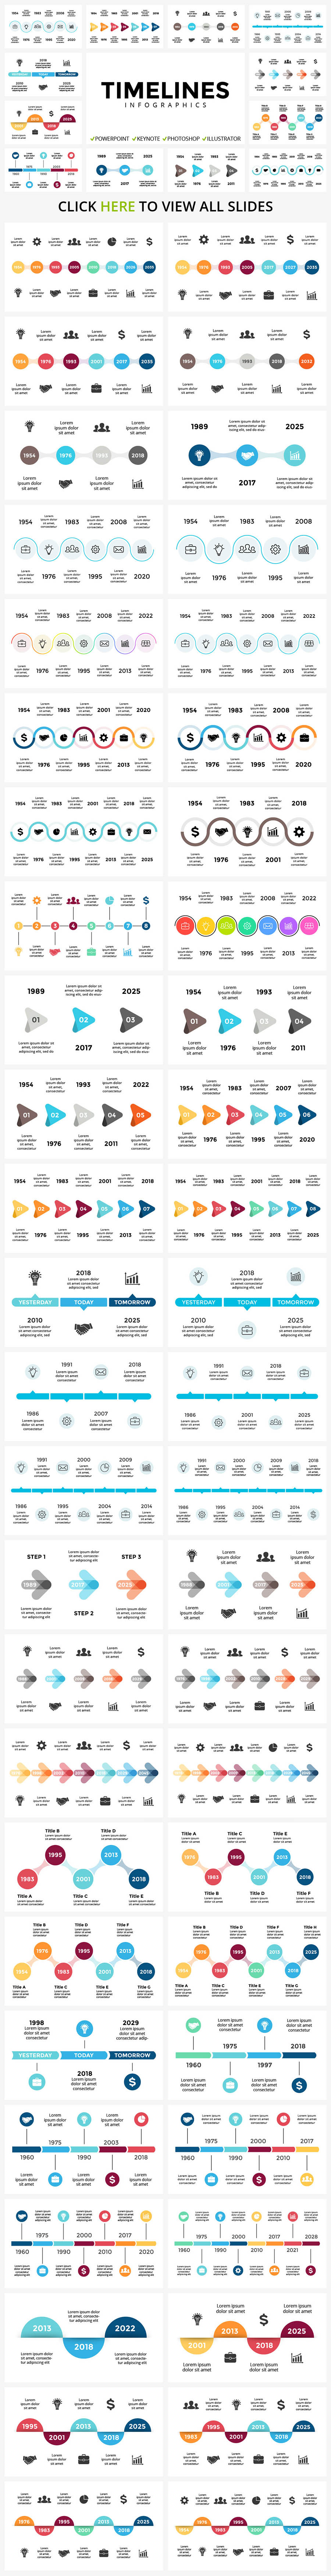 Telling about an event in chronological order is sometimes boring and dull. By adding elements from this infographic, your timeline will become noticeable and interesting.